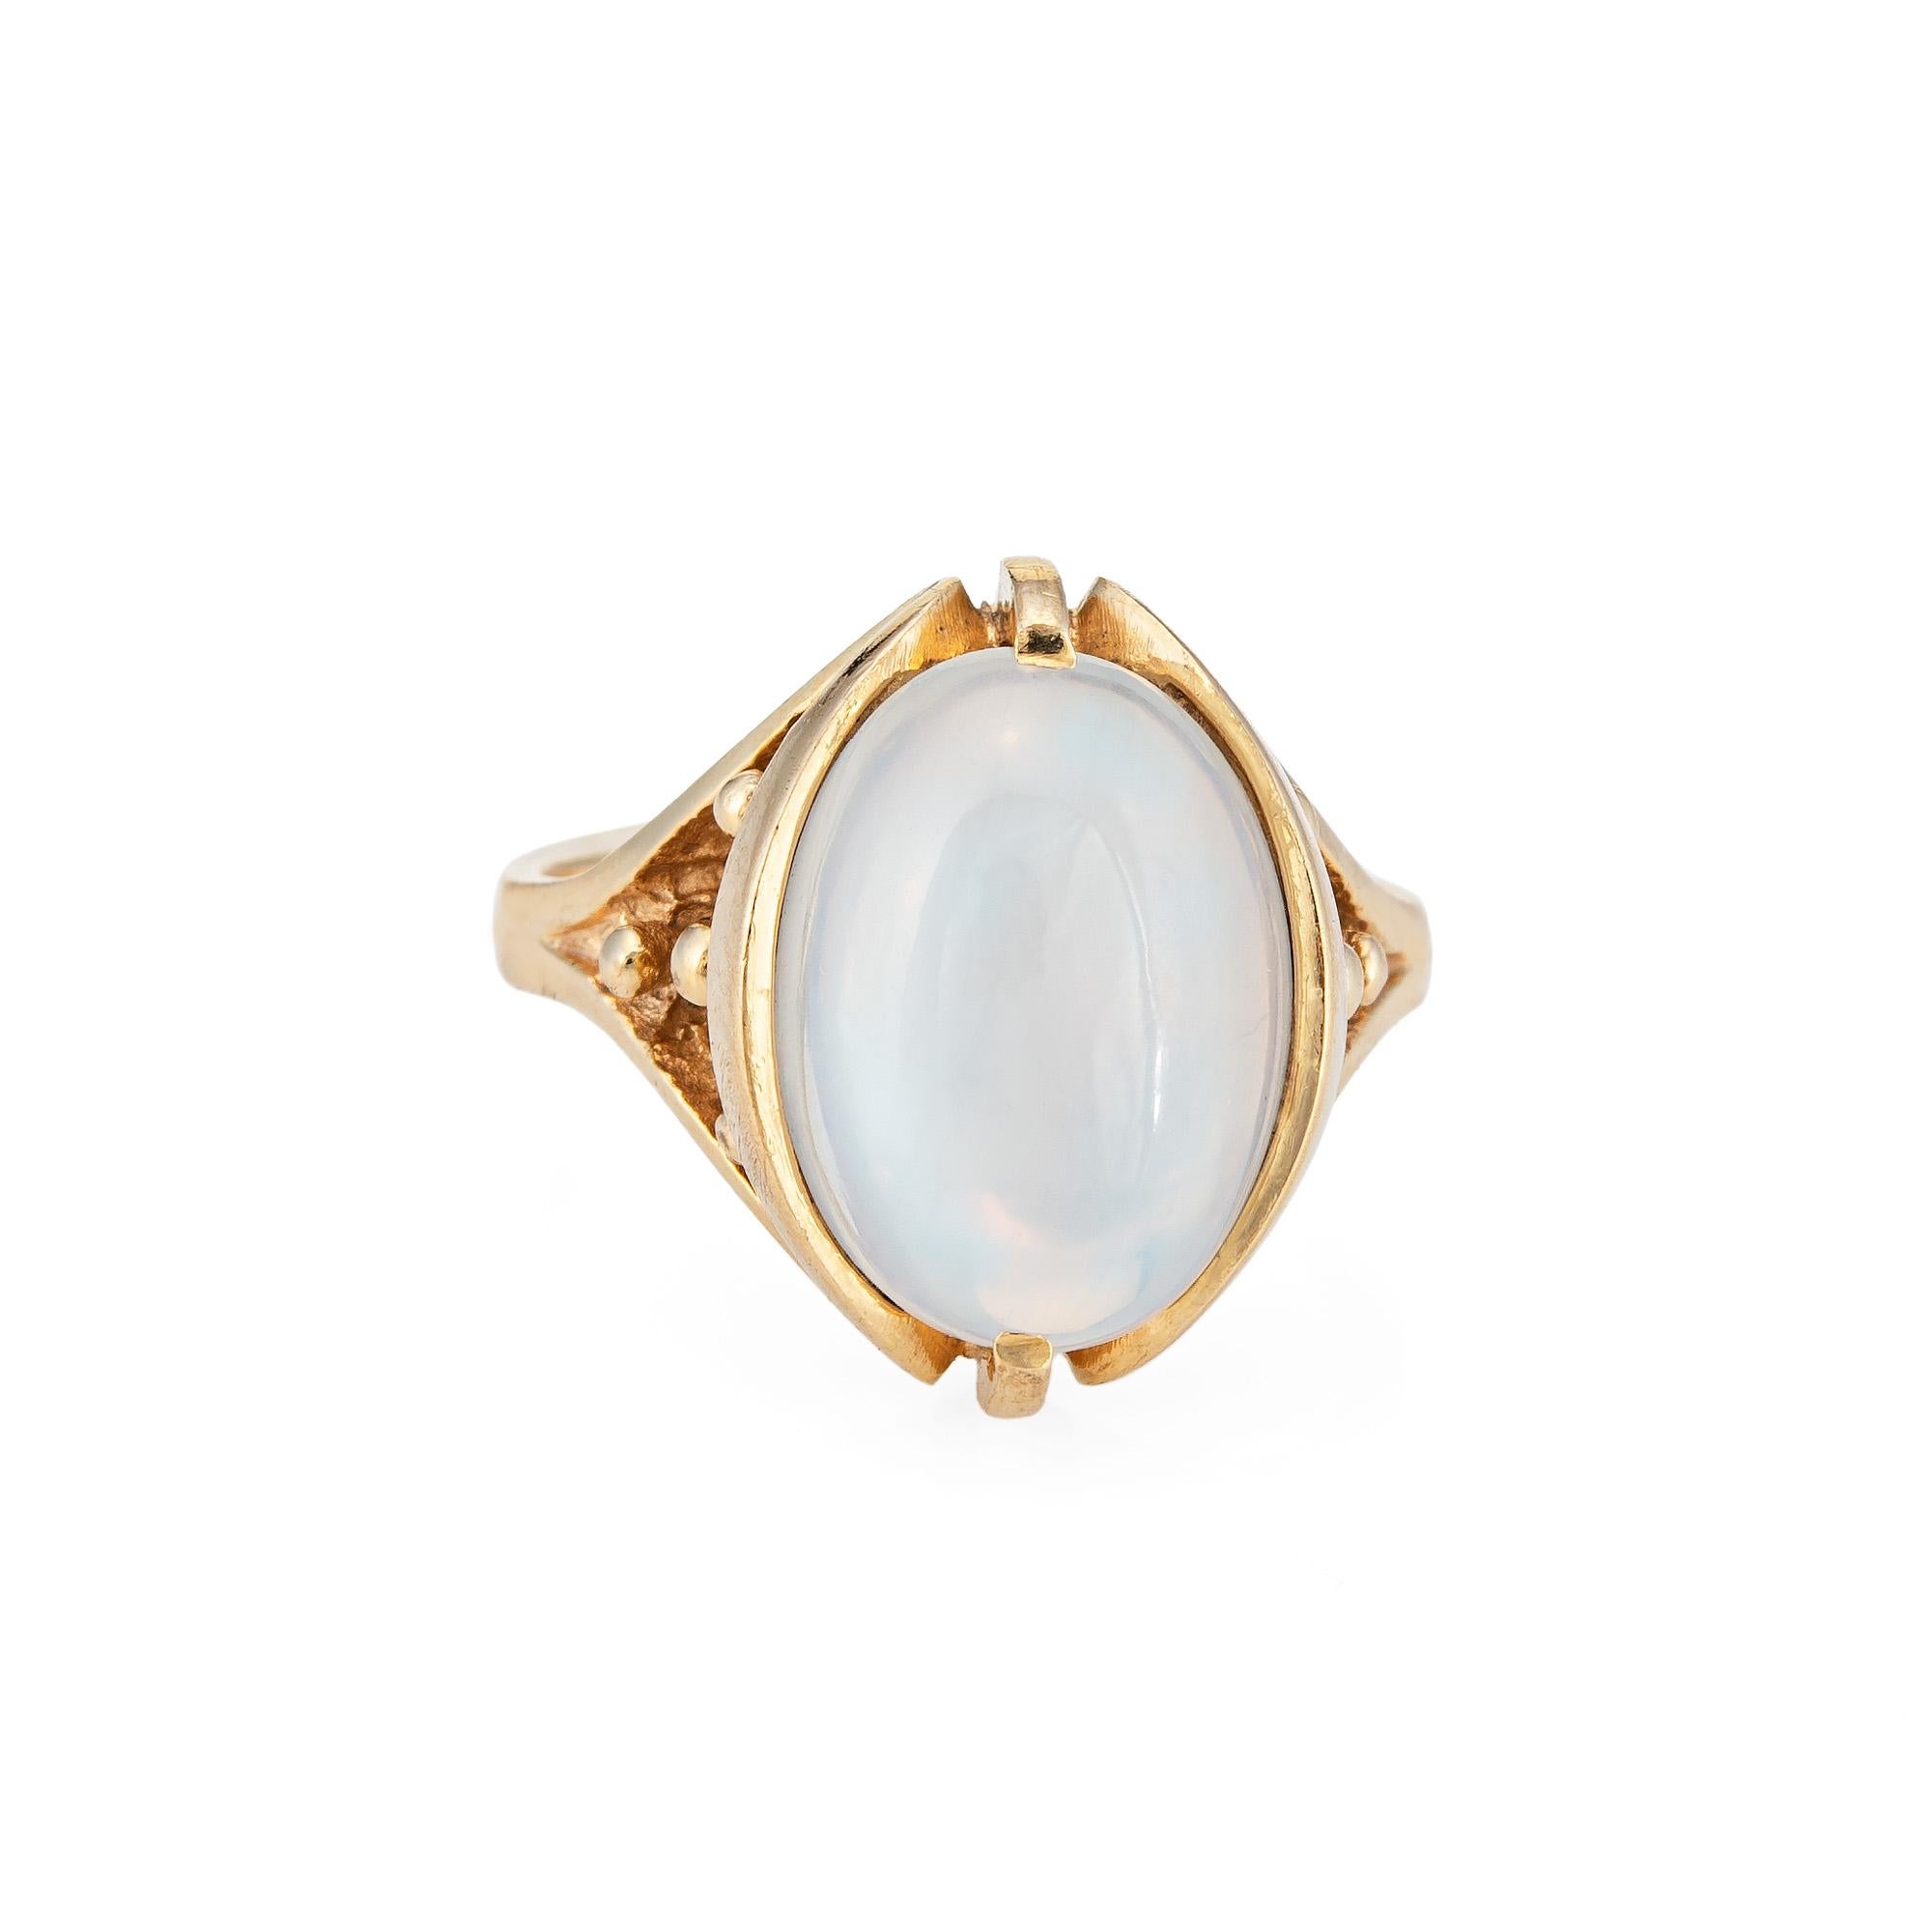 Stylish vintage moonstone cocktail ring (circa 1960s to 1970s) crafted in 10 karat yellow gold. 

Cabochon moonstone measures 13.5mm x 9mm. The moonstone is in very good condition and free of cracks or chips. 

The luminous moonstone glows with